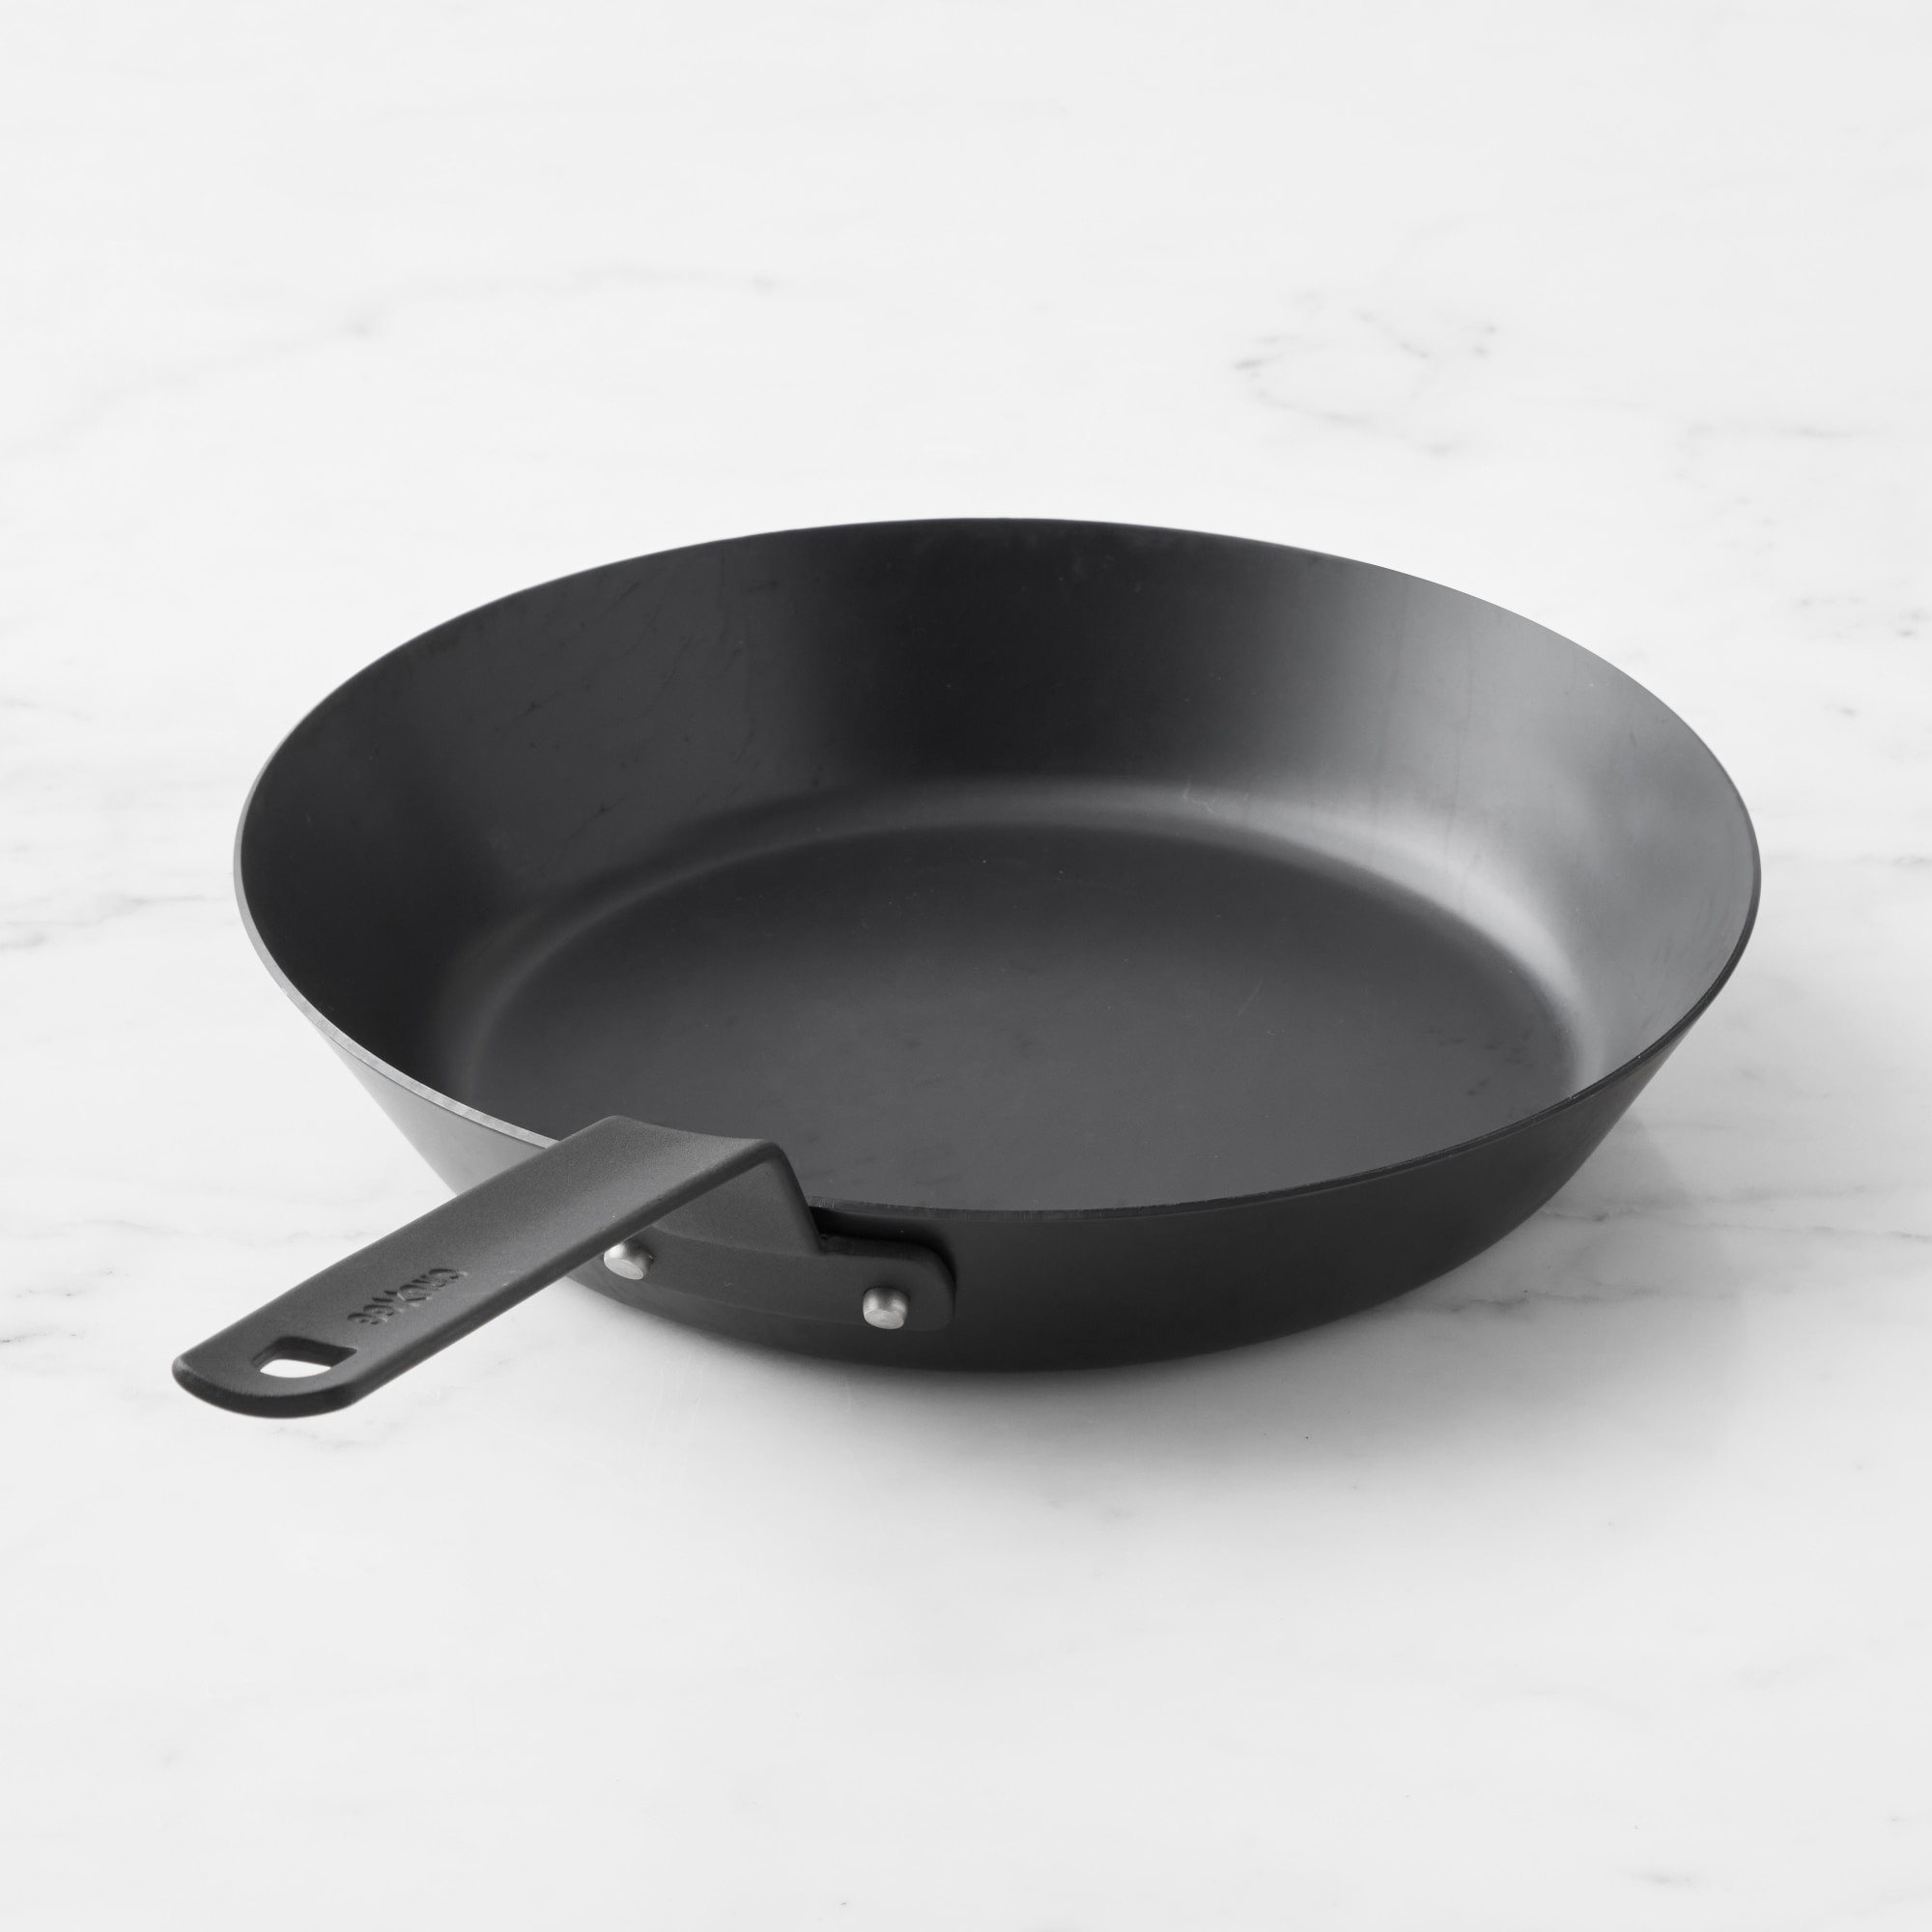 CRUXGG 10” Blue Carbon Steel Frying Pan - $47.99 + tax at Williams Sonoma